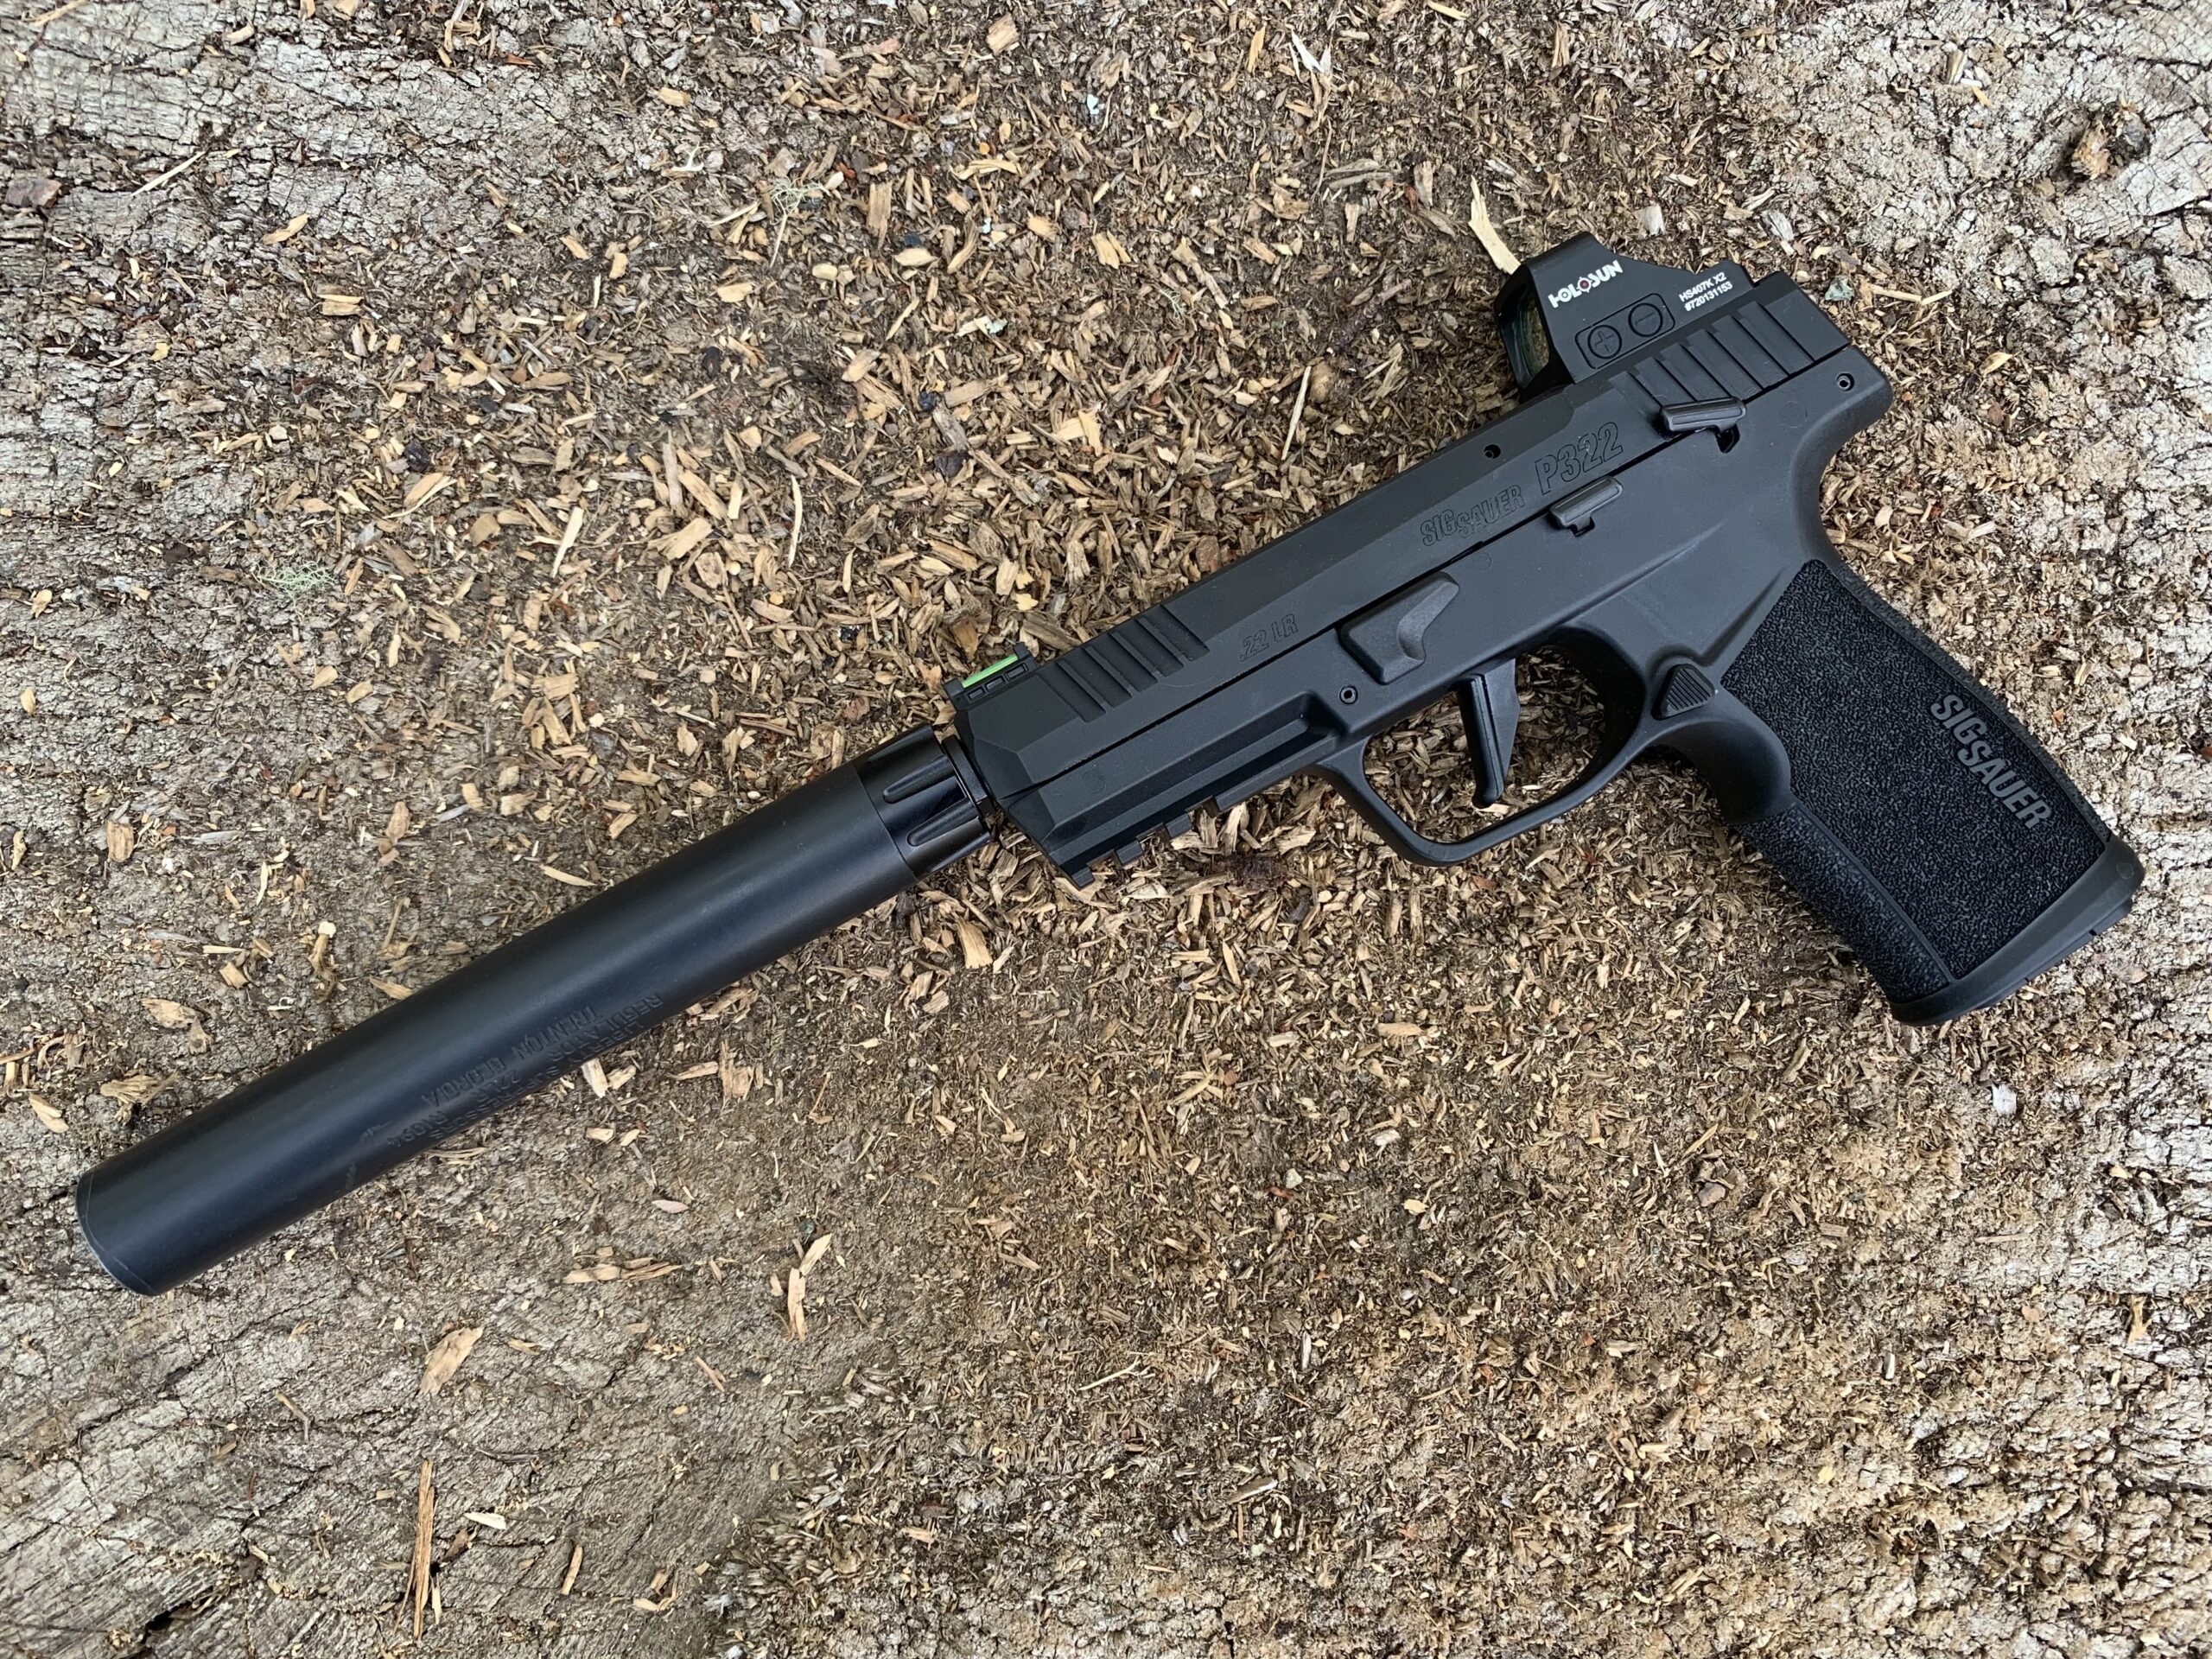 The Sig P322 fitted with a suppressor and red dot